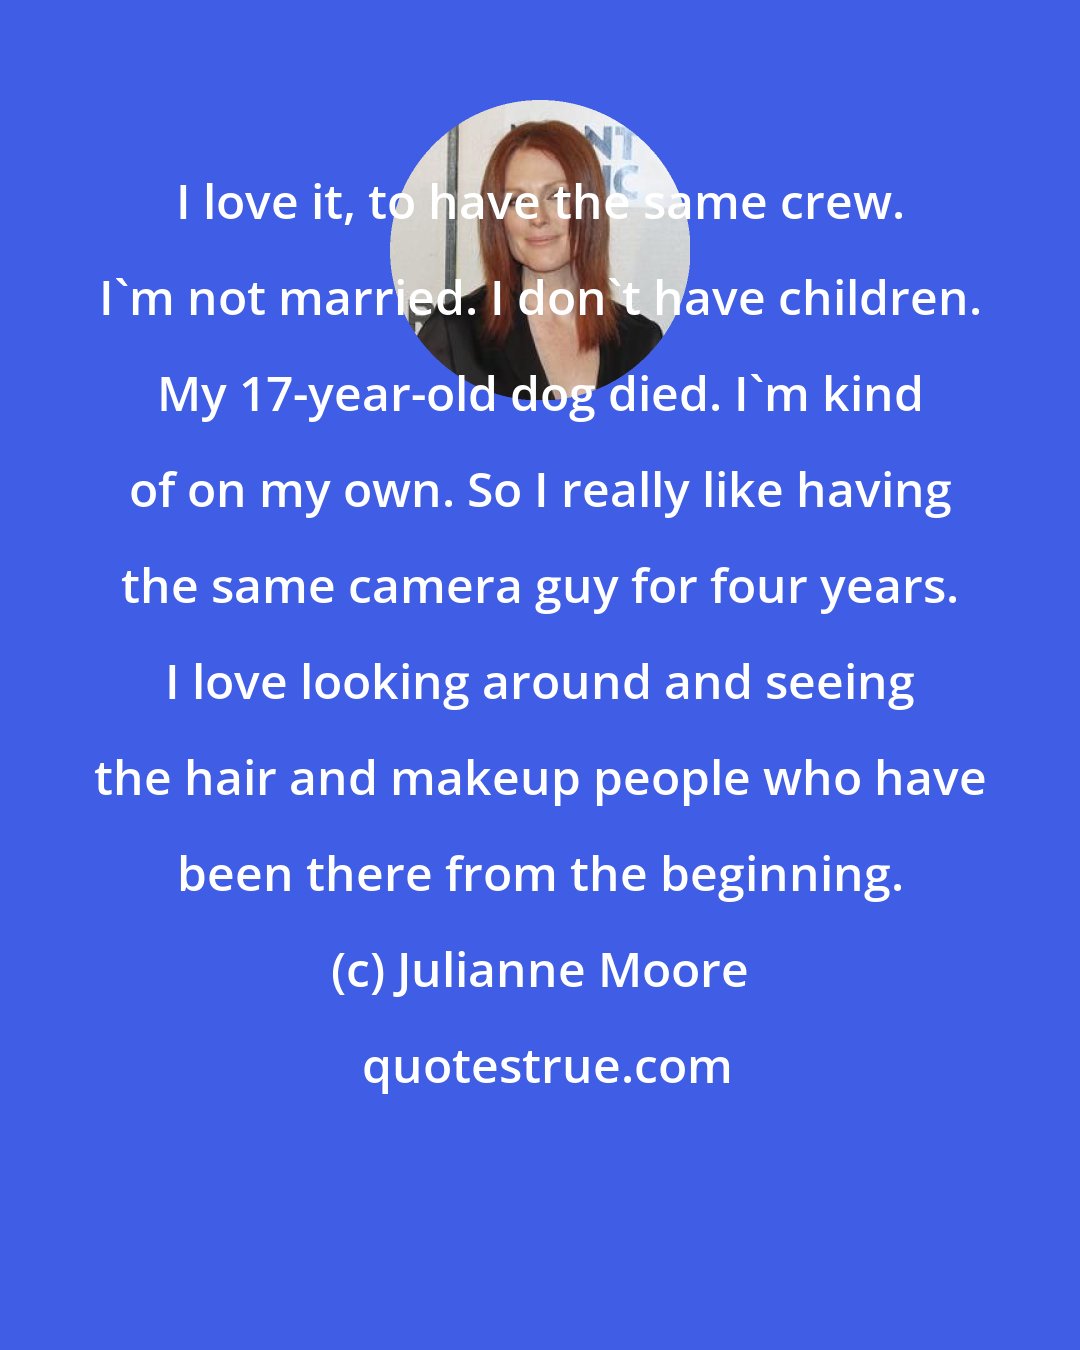 Julianne Moore: I love it, to have the same crew. I'm not married. I don't have children. My 17-year-old dog died. I'm kind of on my own. So I really like having the same camera guy for four years. I love looking around and seeing the hair and makeup people who have been there from the beginning.